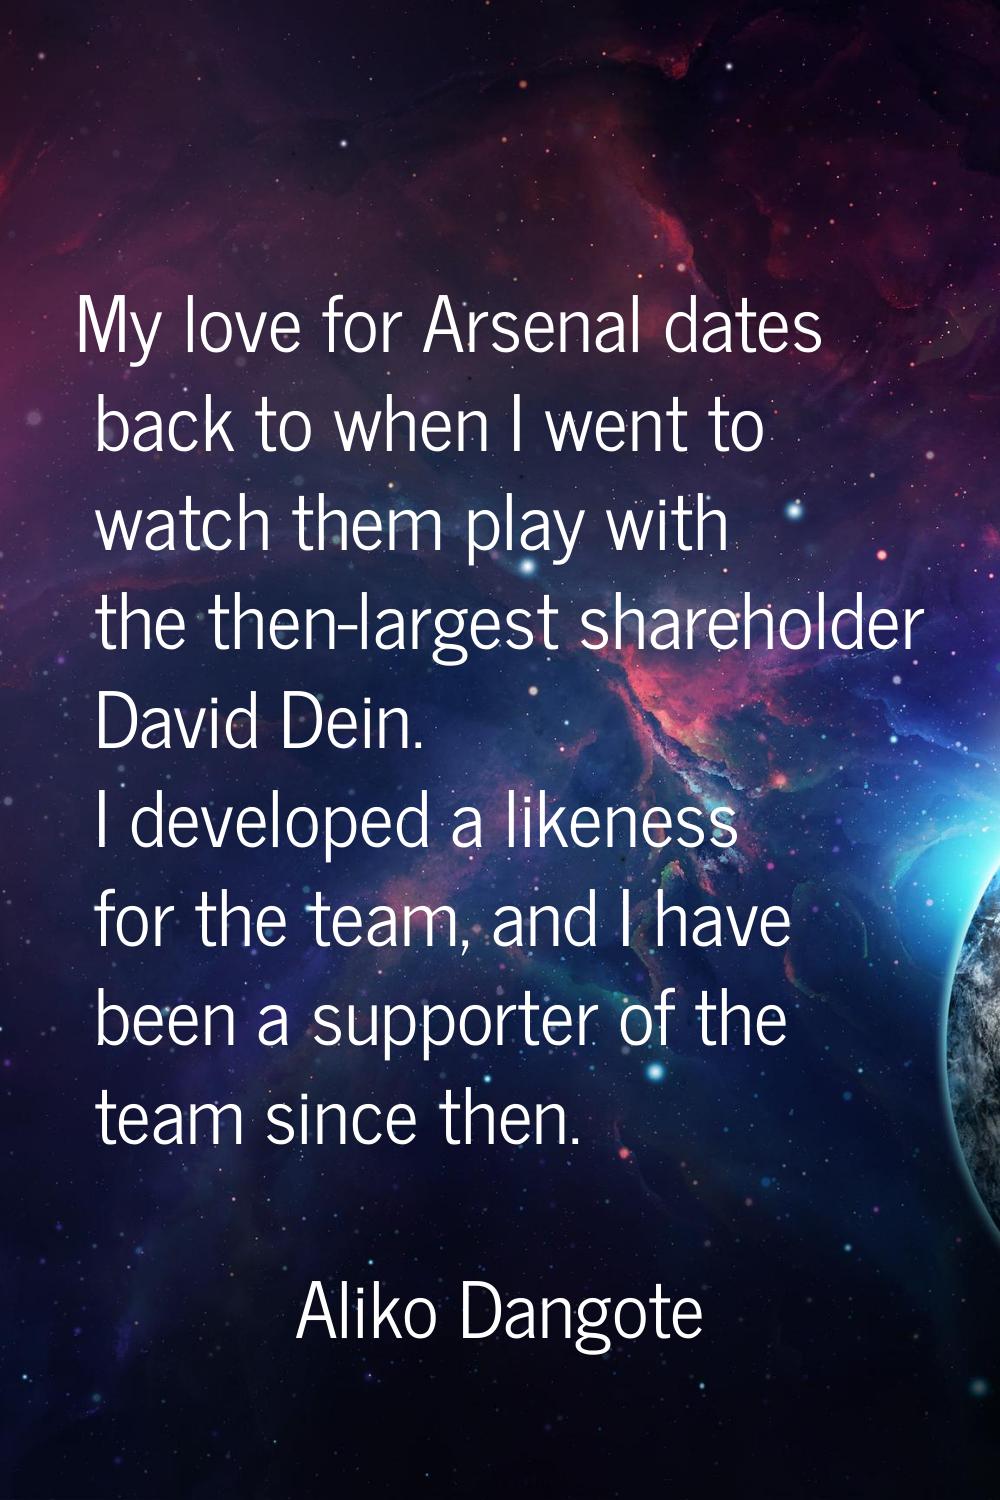 My love for Arsenal dates back to when I went to watch them play with the then-largest shareholder 